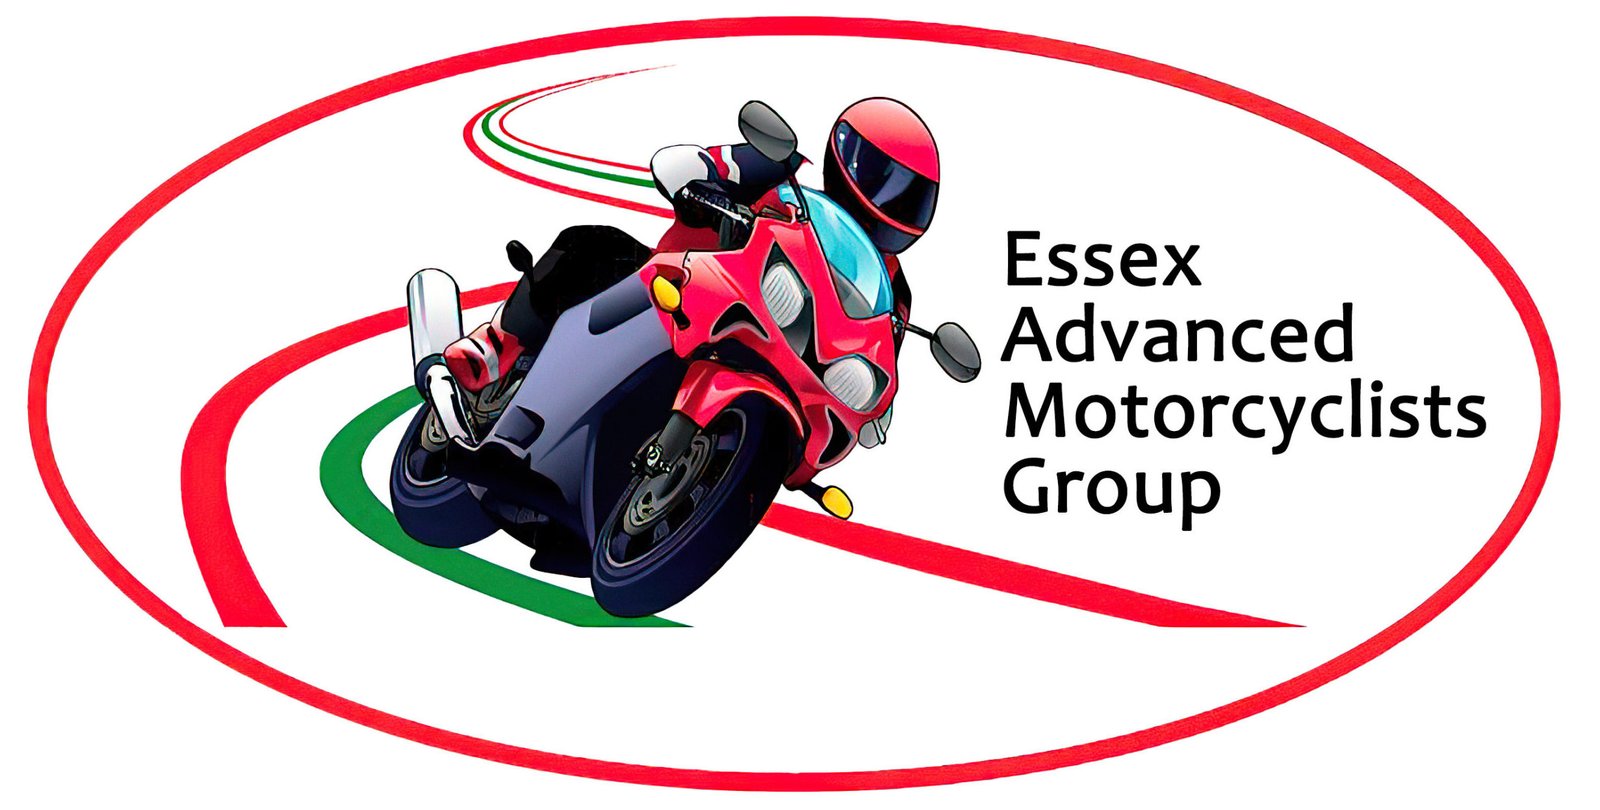 Essex Advanced Motorcyclists Group